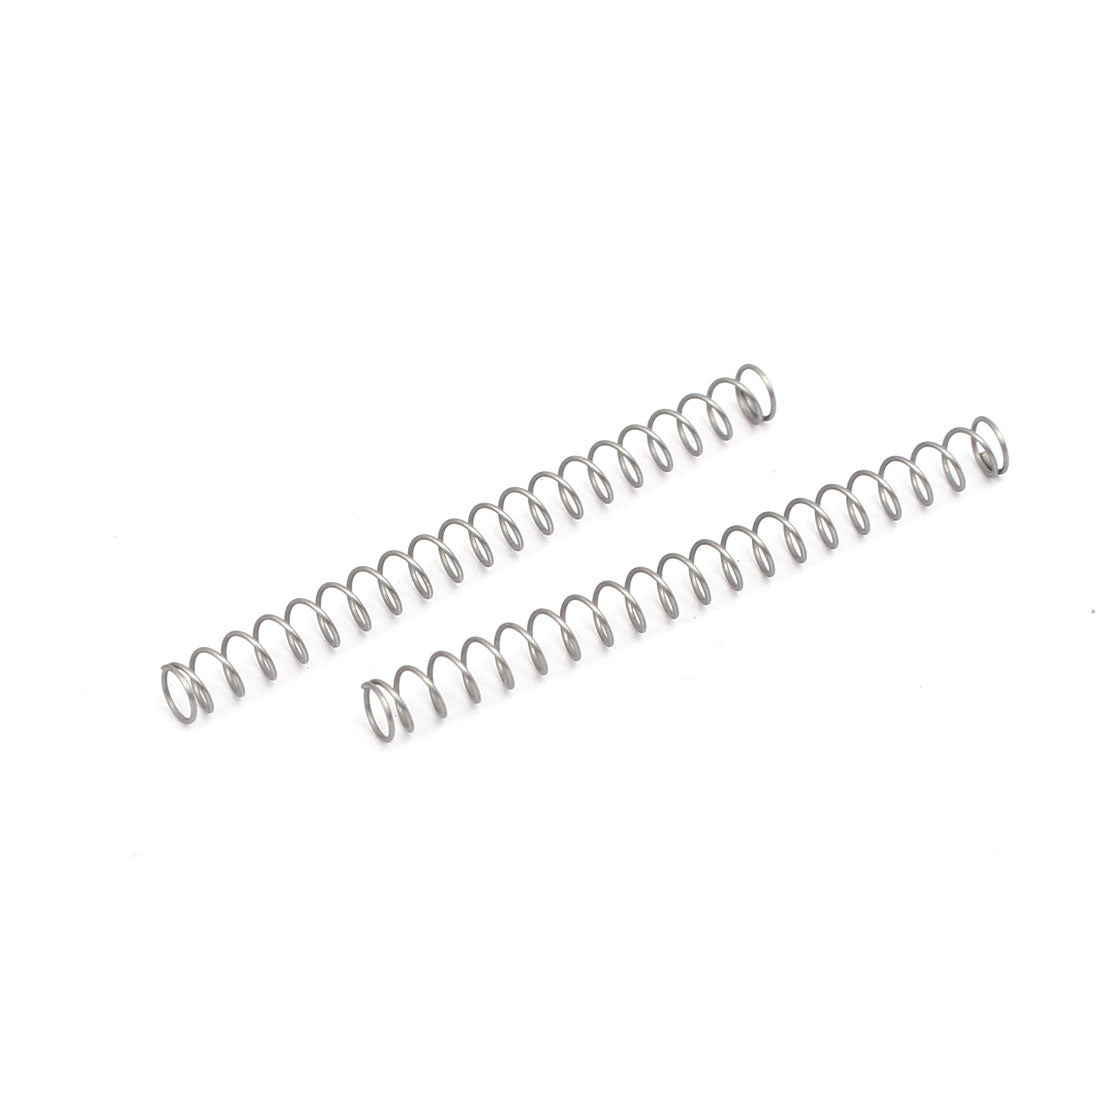 uxcell Uxcell 0.3mmx3mmx35mm 304 Stainless Steel Compression Springs Silver Tone 10pcs